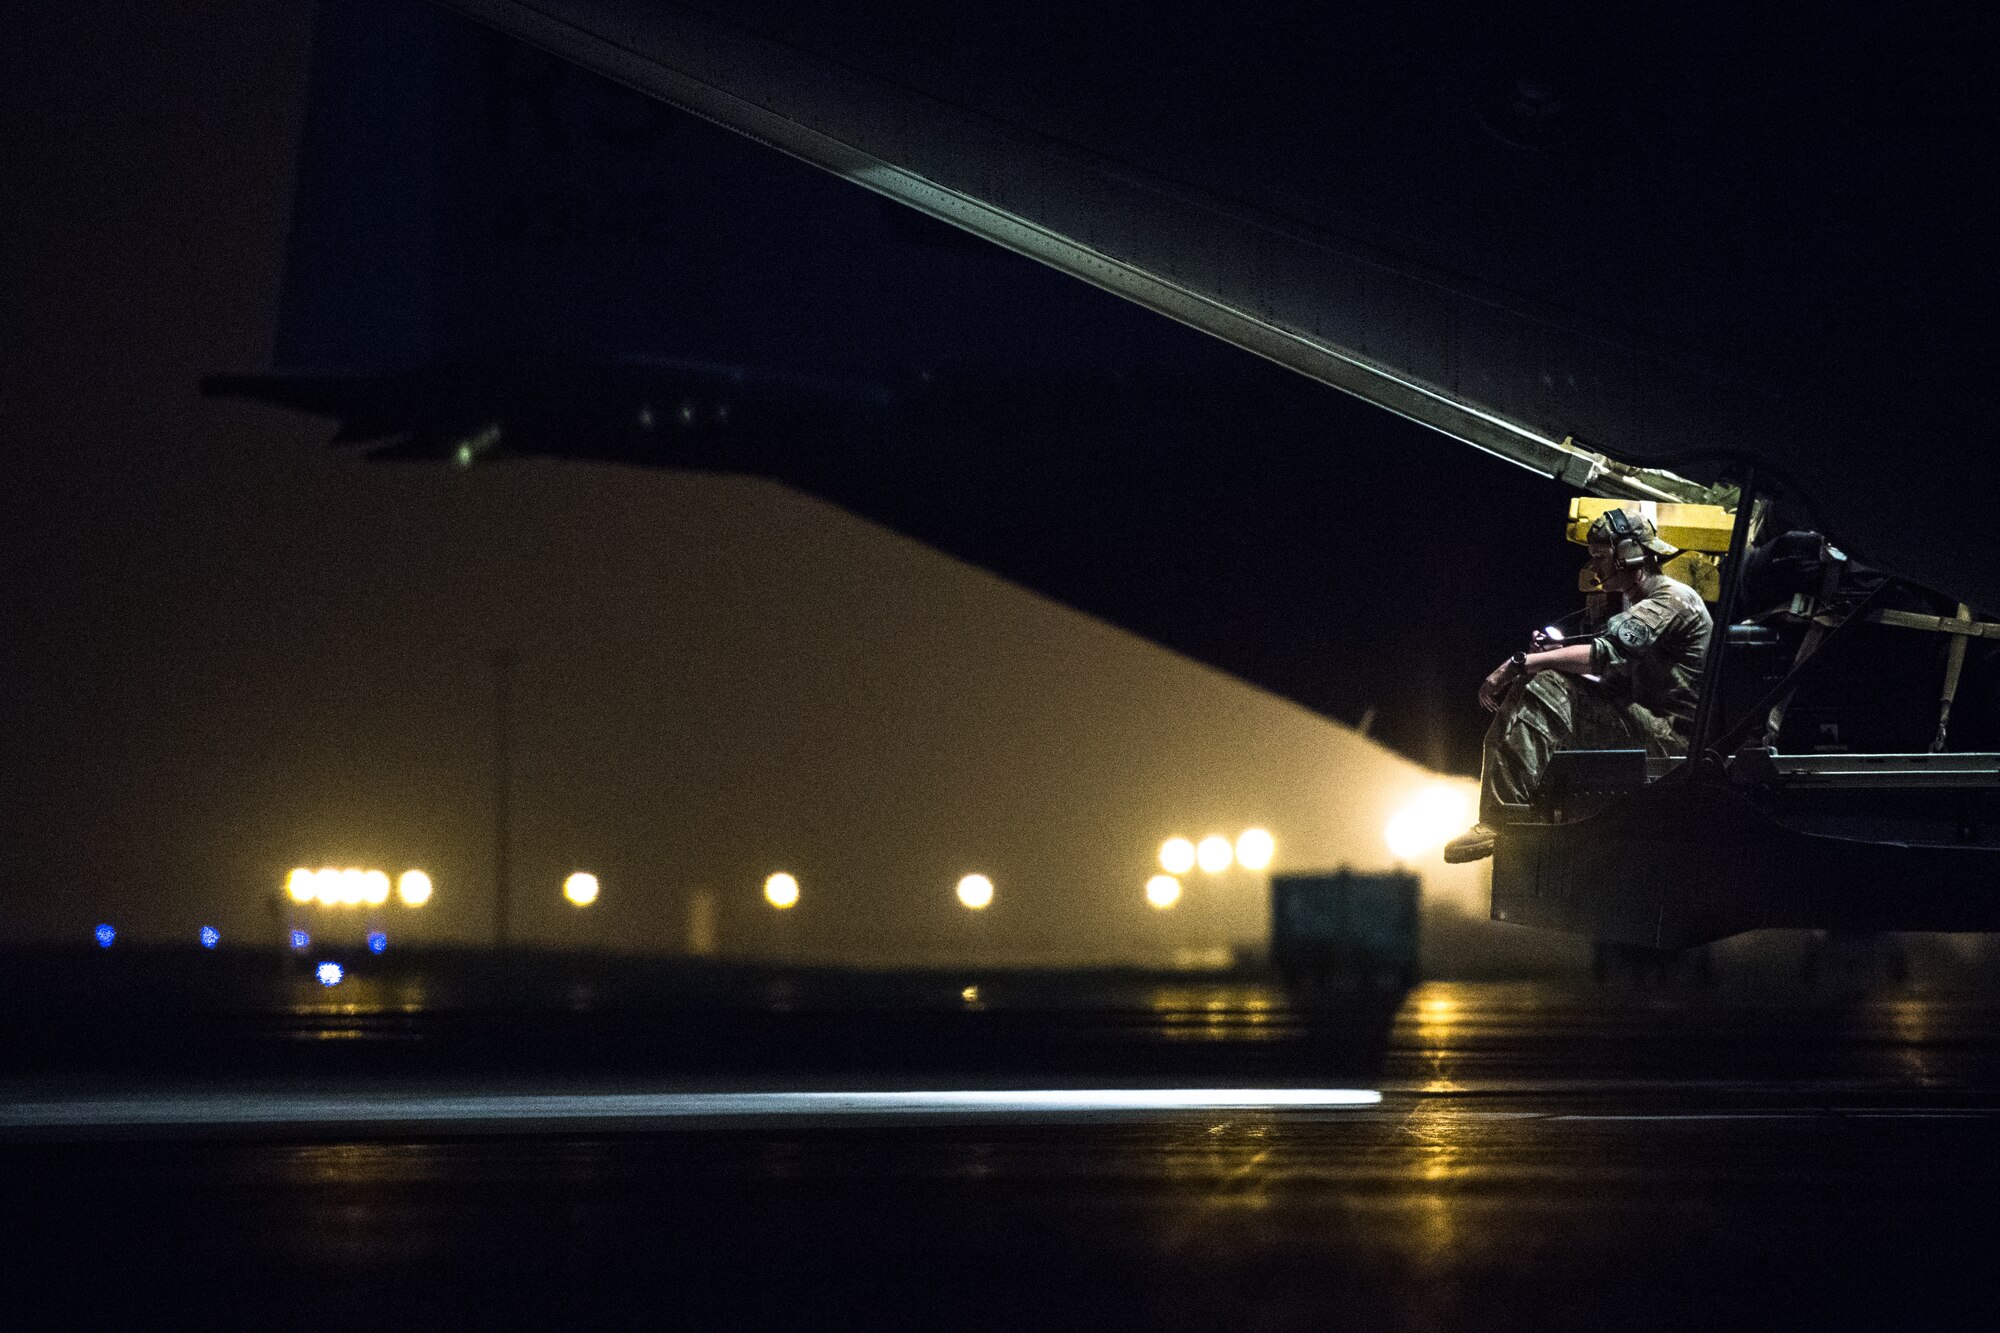 U.S. Air Force Staff Sgt. Dillon Lafond, 75th Expeditionary Airlift Squadron loadmaster, sits on the back of a C-130J Super Hercules before flying out of Camp Lemonnier, Djibouti, June 5, 2019. The 75th EAS provides support in medical evacuations, disaster relief, humanitarian and airdrop operations. (U.S. Air Force photo by Staff Sgt. Devin Boyer)